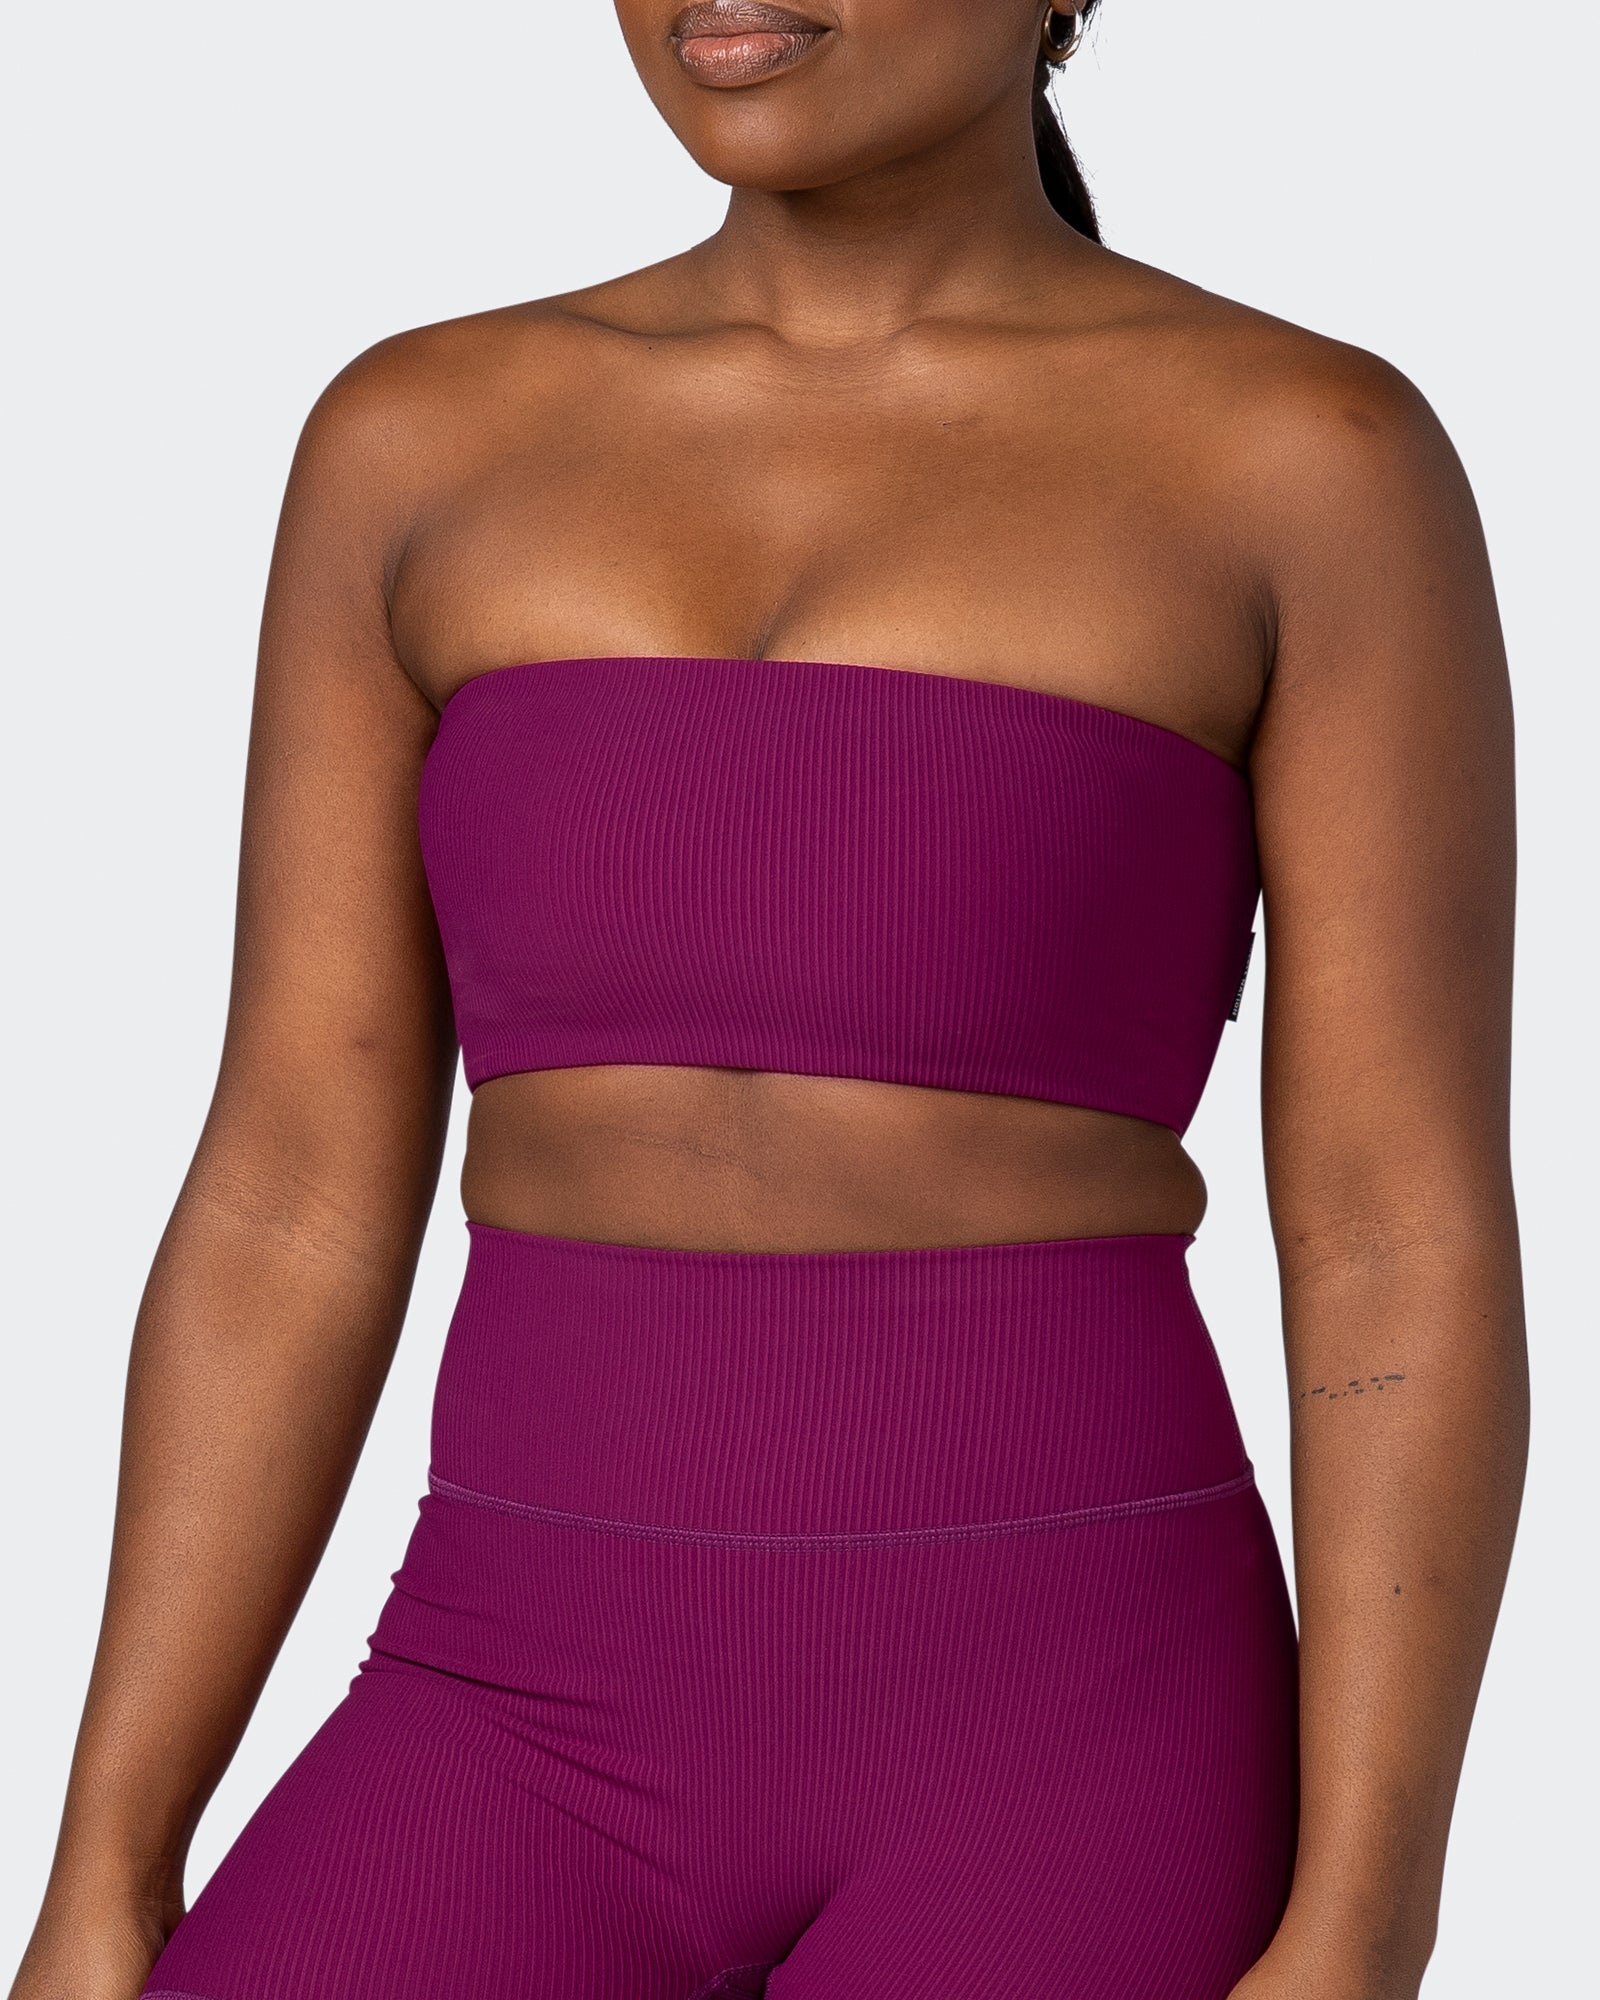 musclenation Sports Bras Ribbed Bandeau - Huckleberry